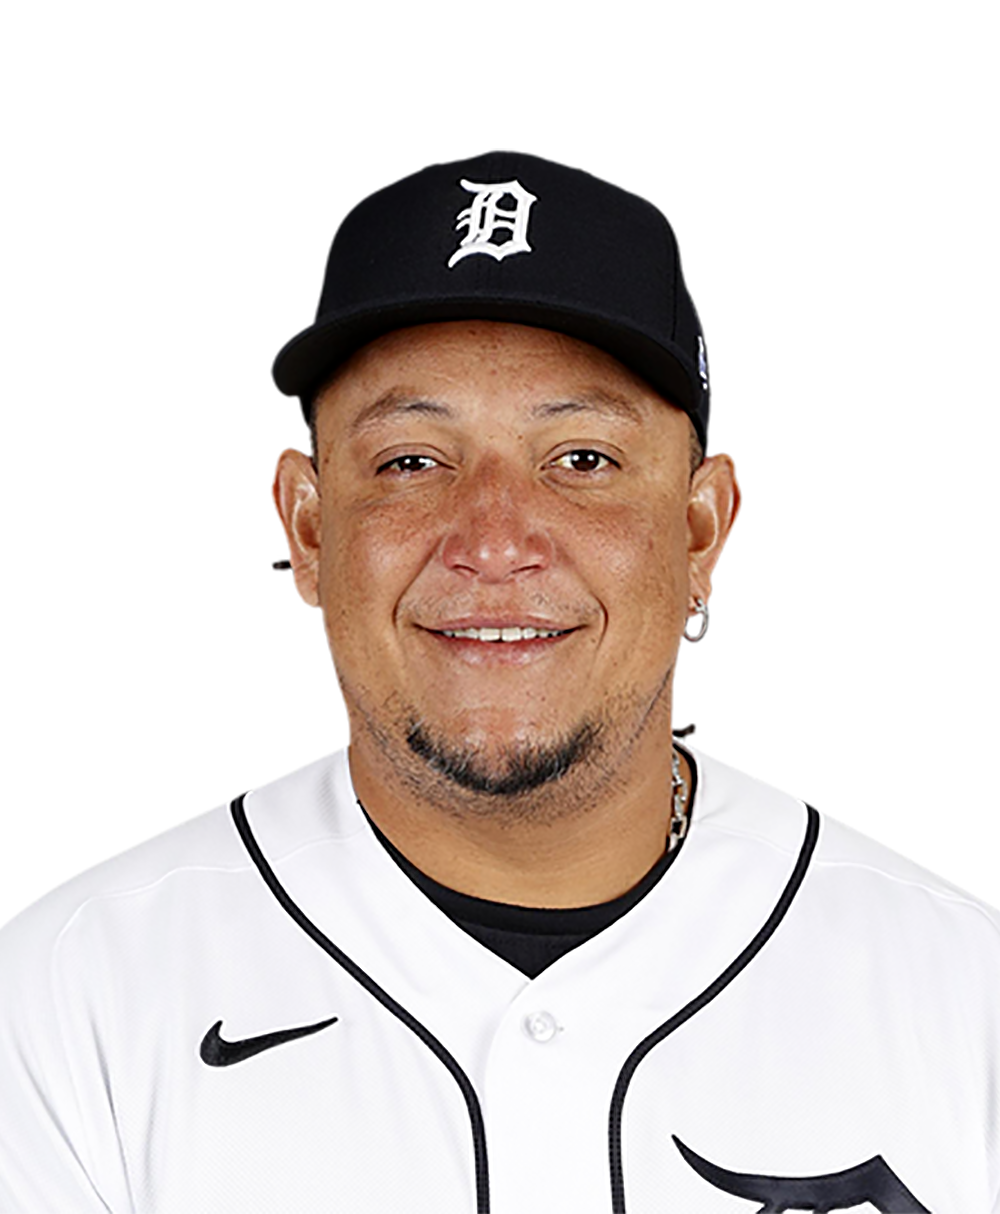 Miguel Cabrera's farewell gifts form every team